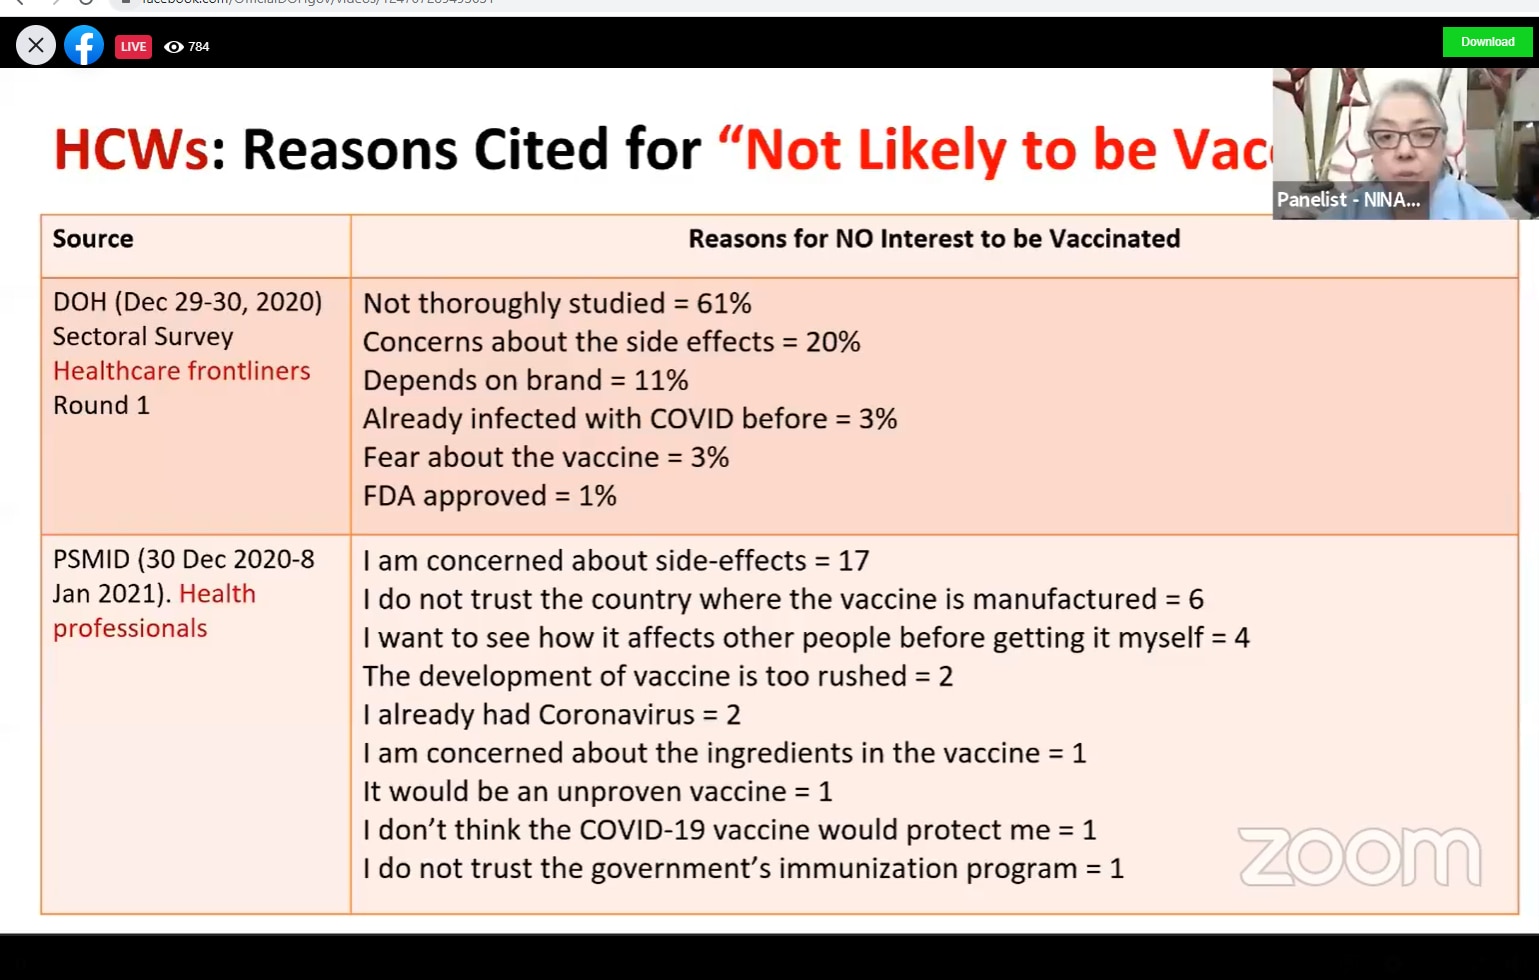 Some health workers wary of COVID-19 vaccine, but those in favor outnumber them - polls 3